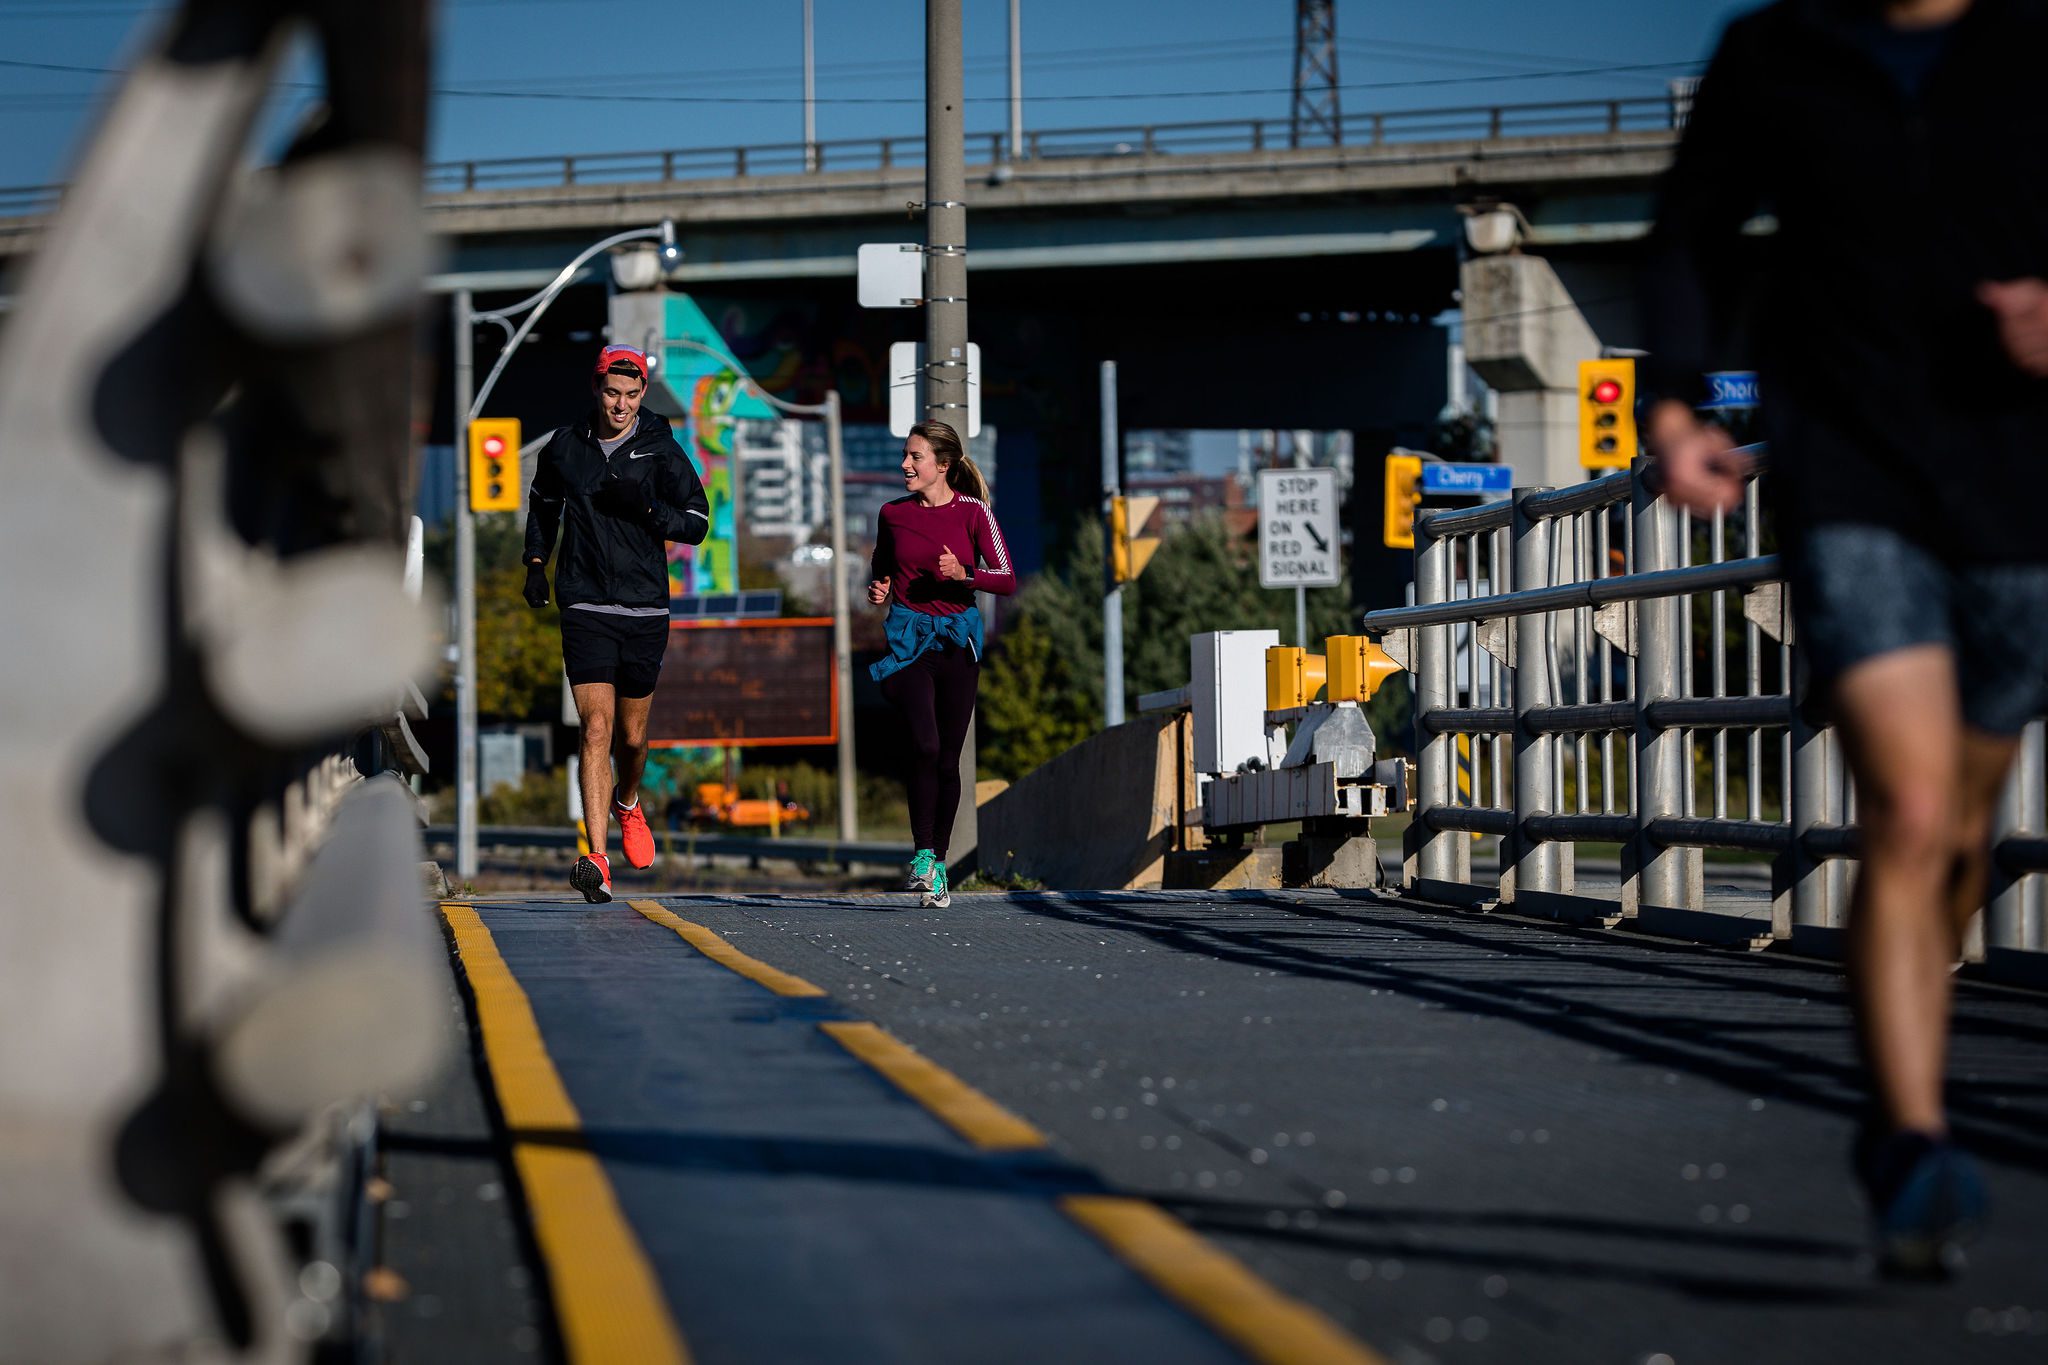 The shakeout run: what is it and should you do one? - Canadian